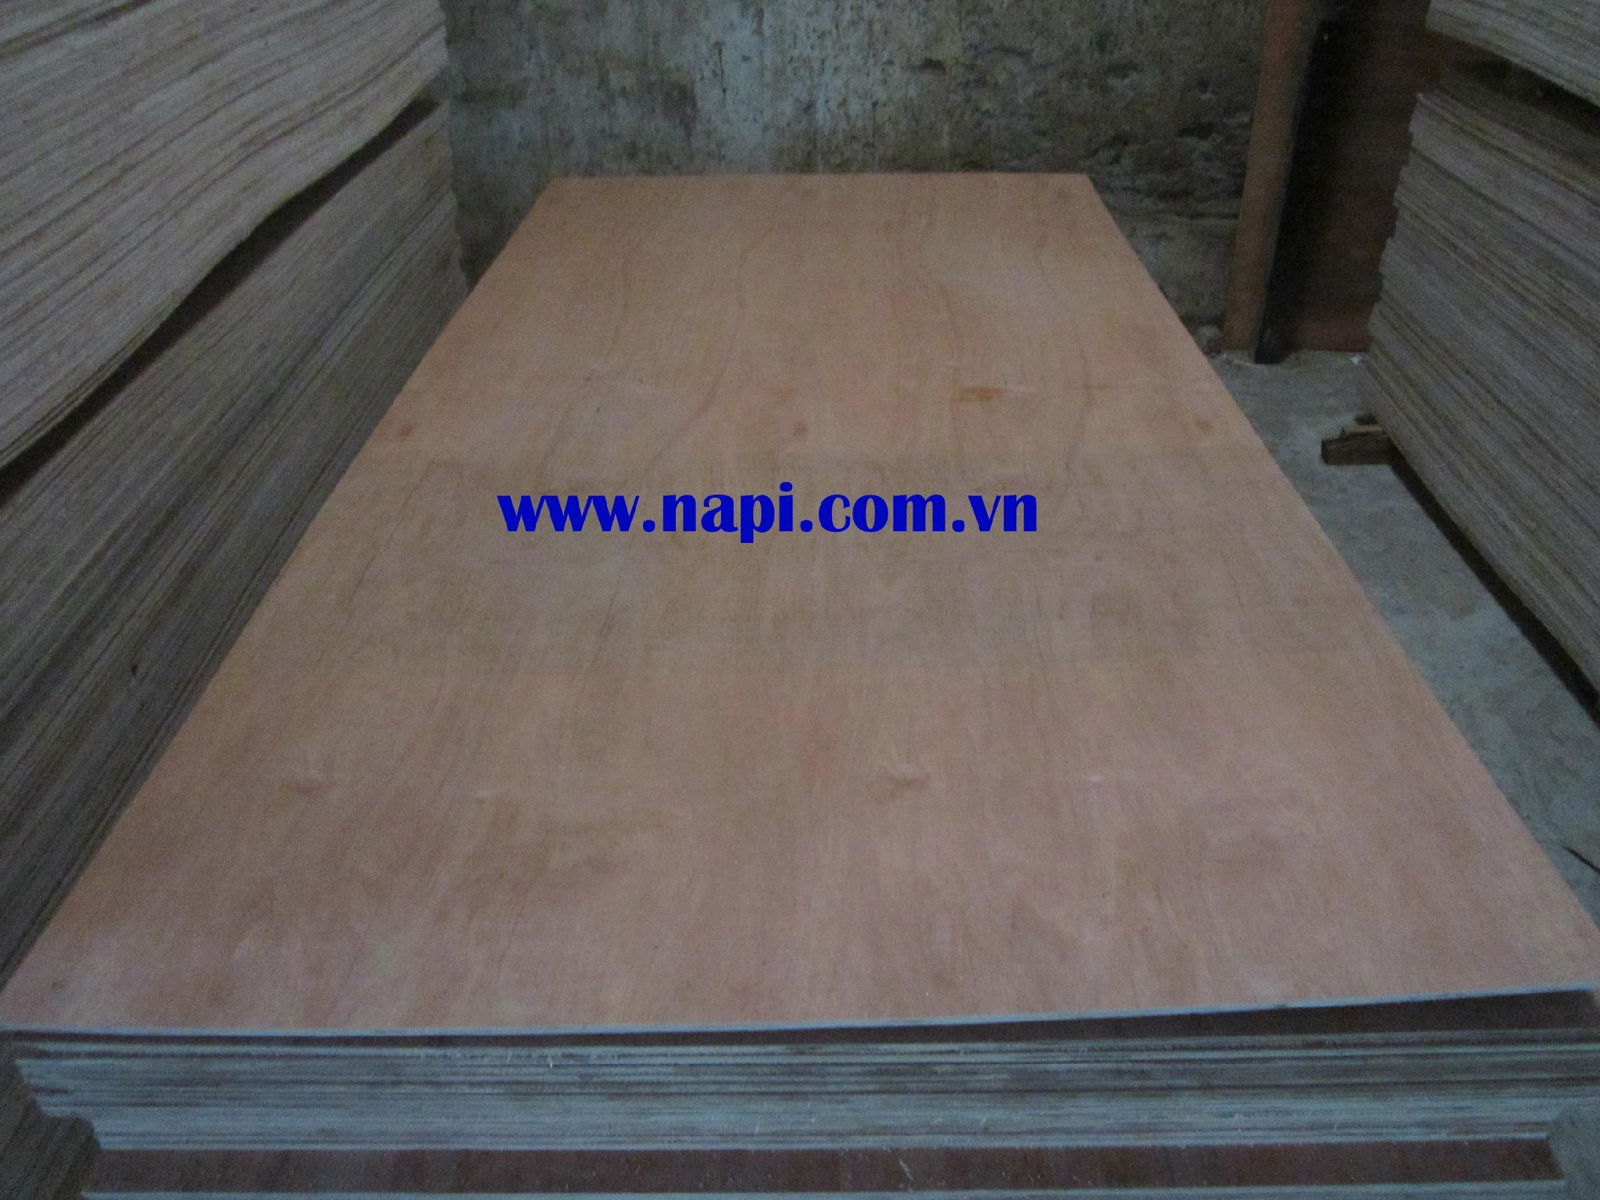 RED color Packing Plywood from Vietnam 4